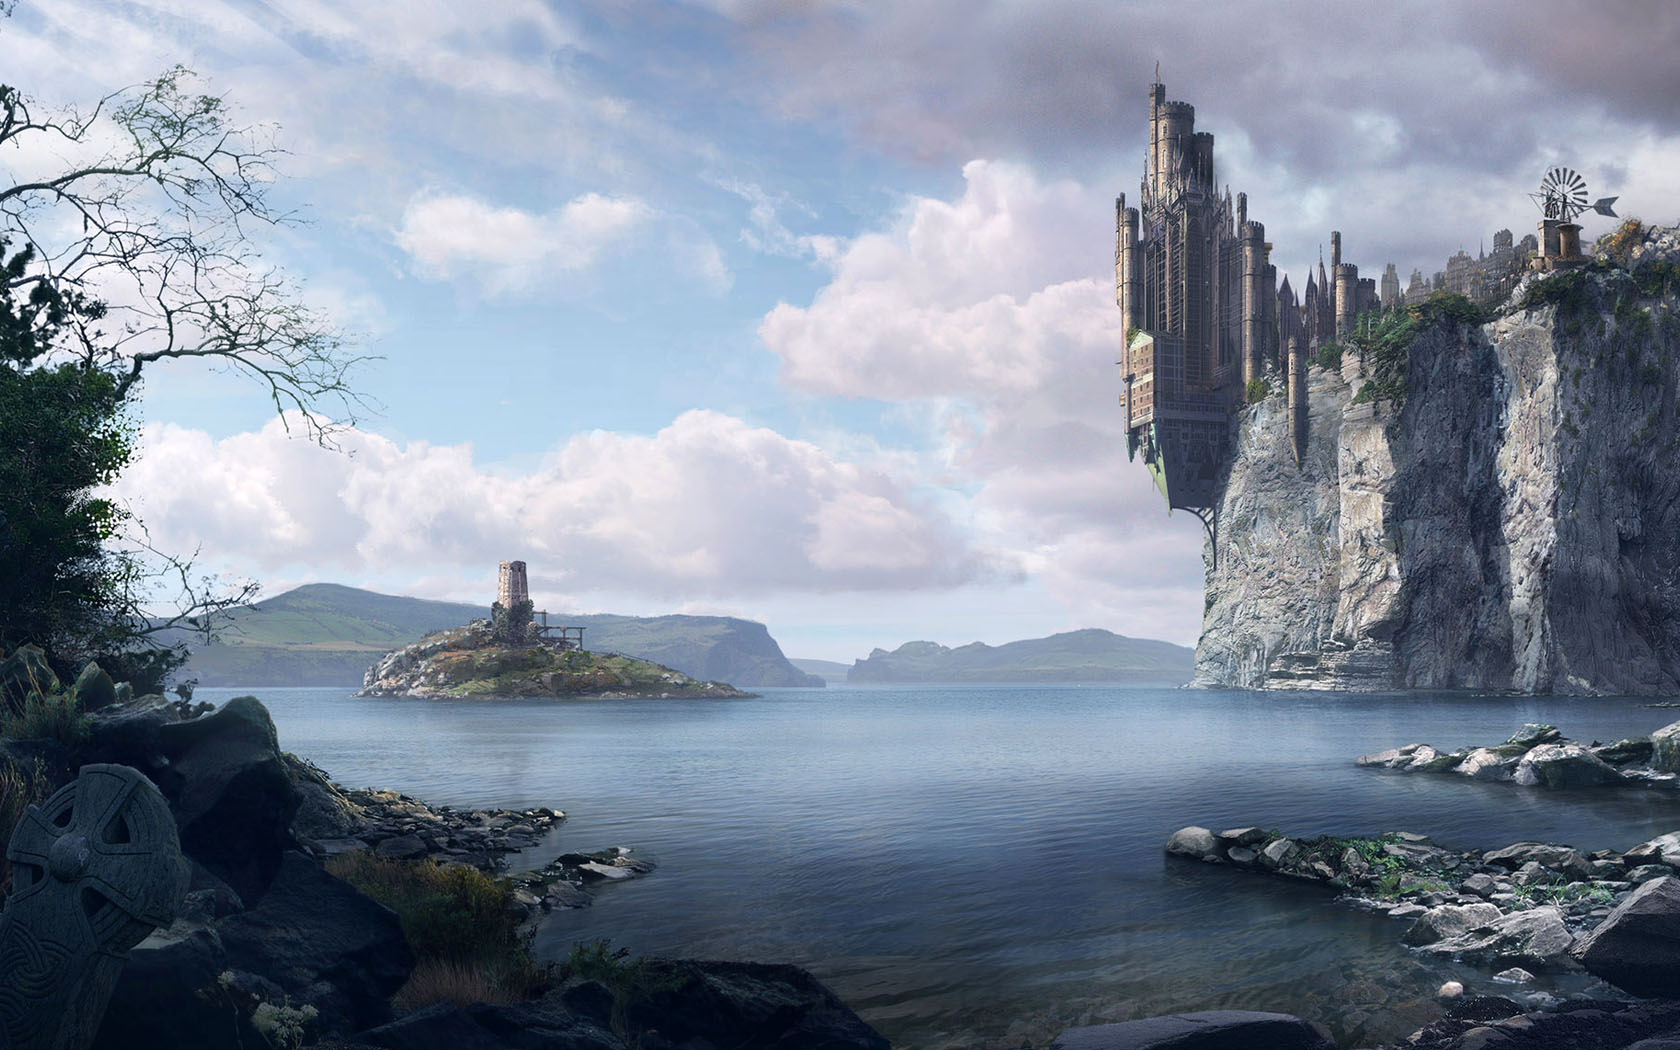 Gothic city by the seaside, overlooking cliffs and a beautiful landscape.